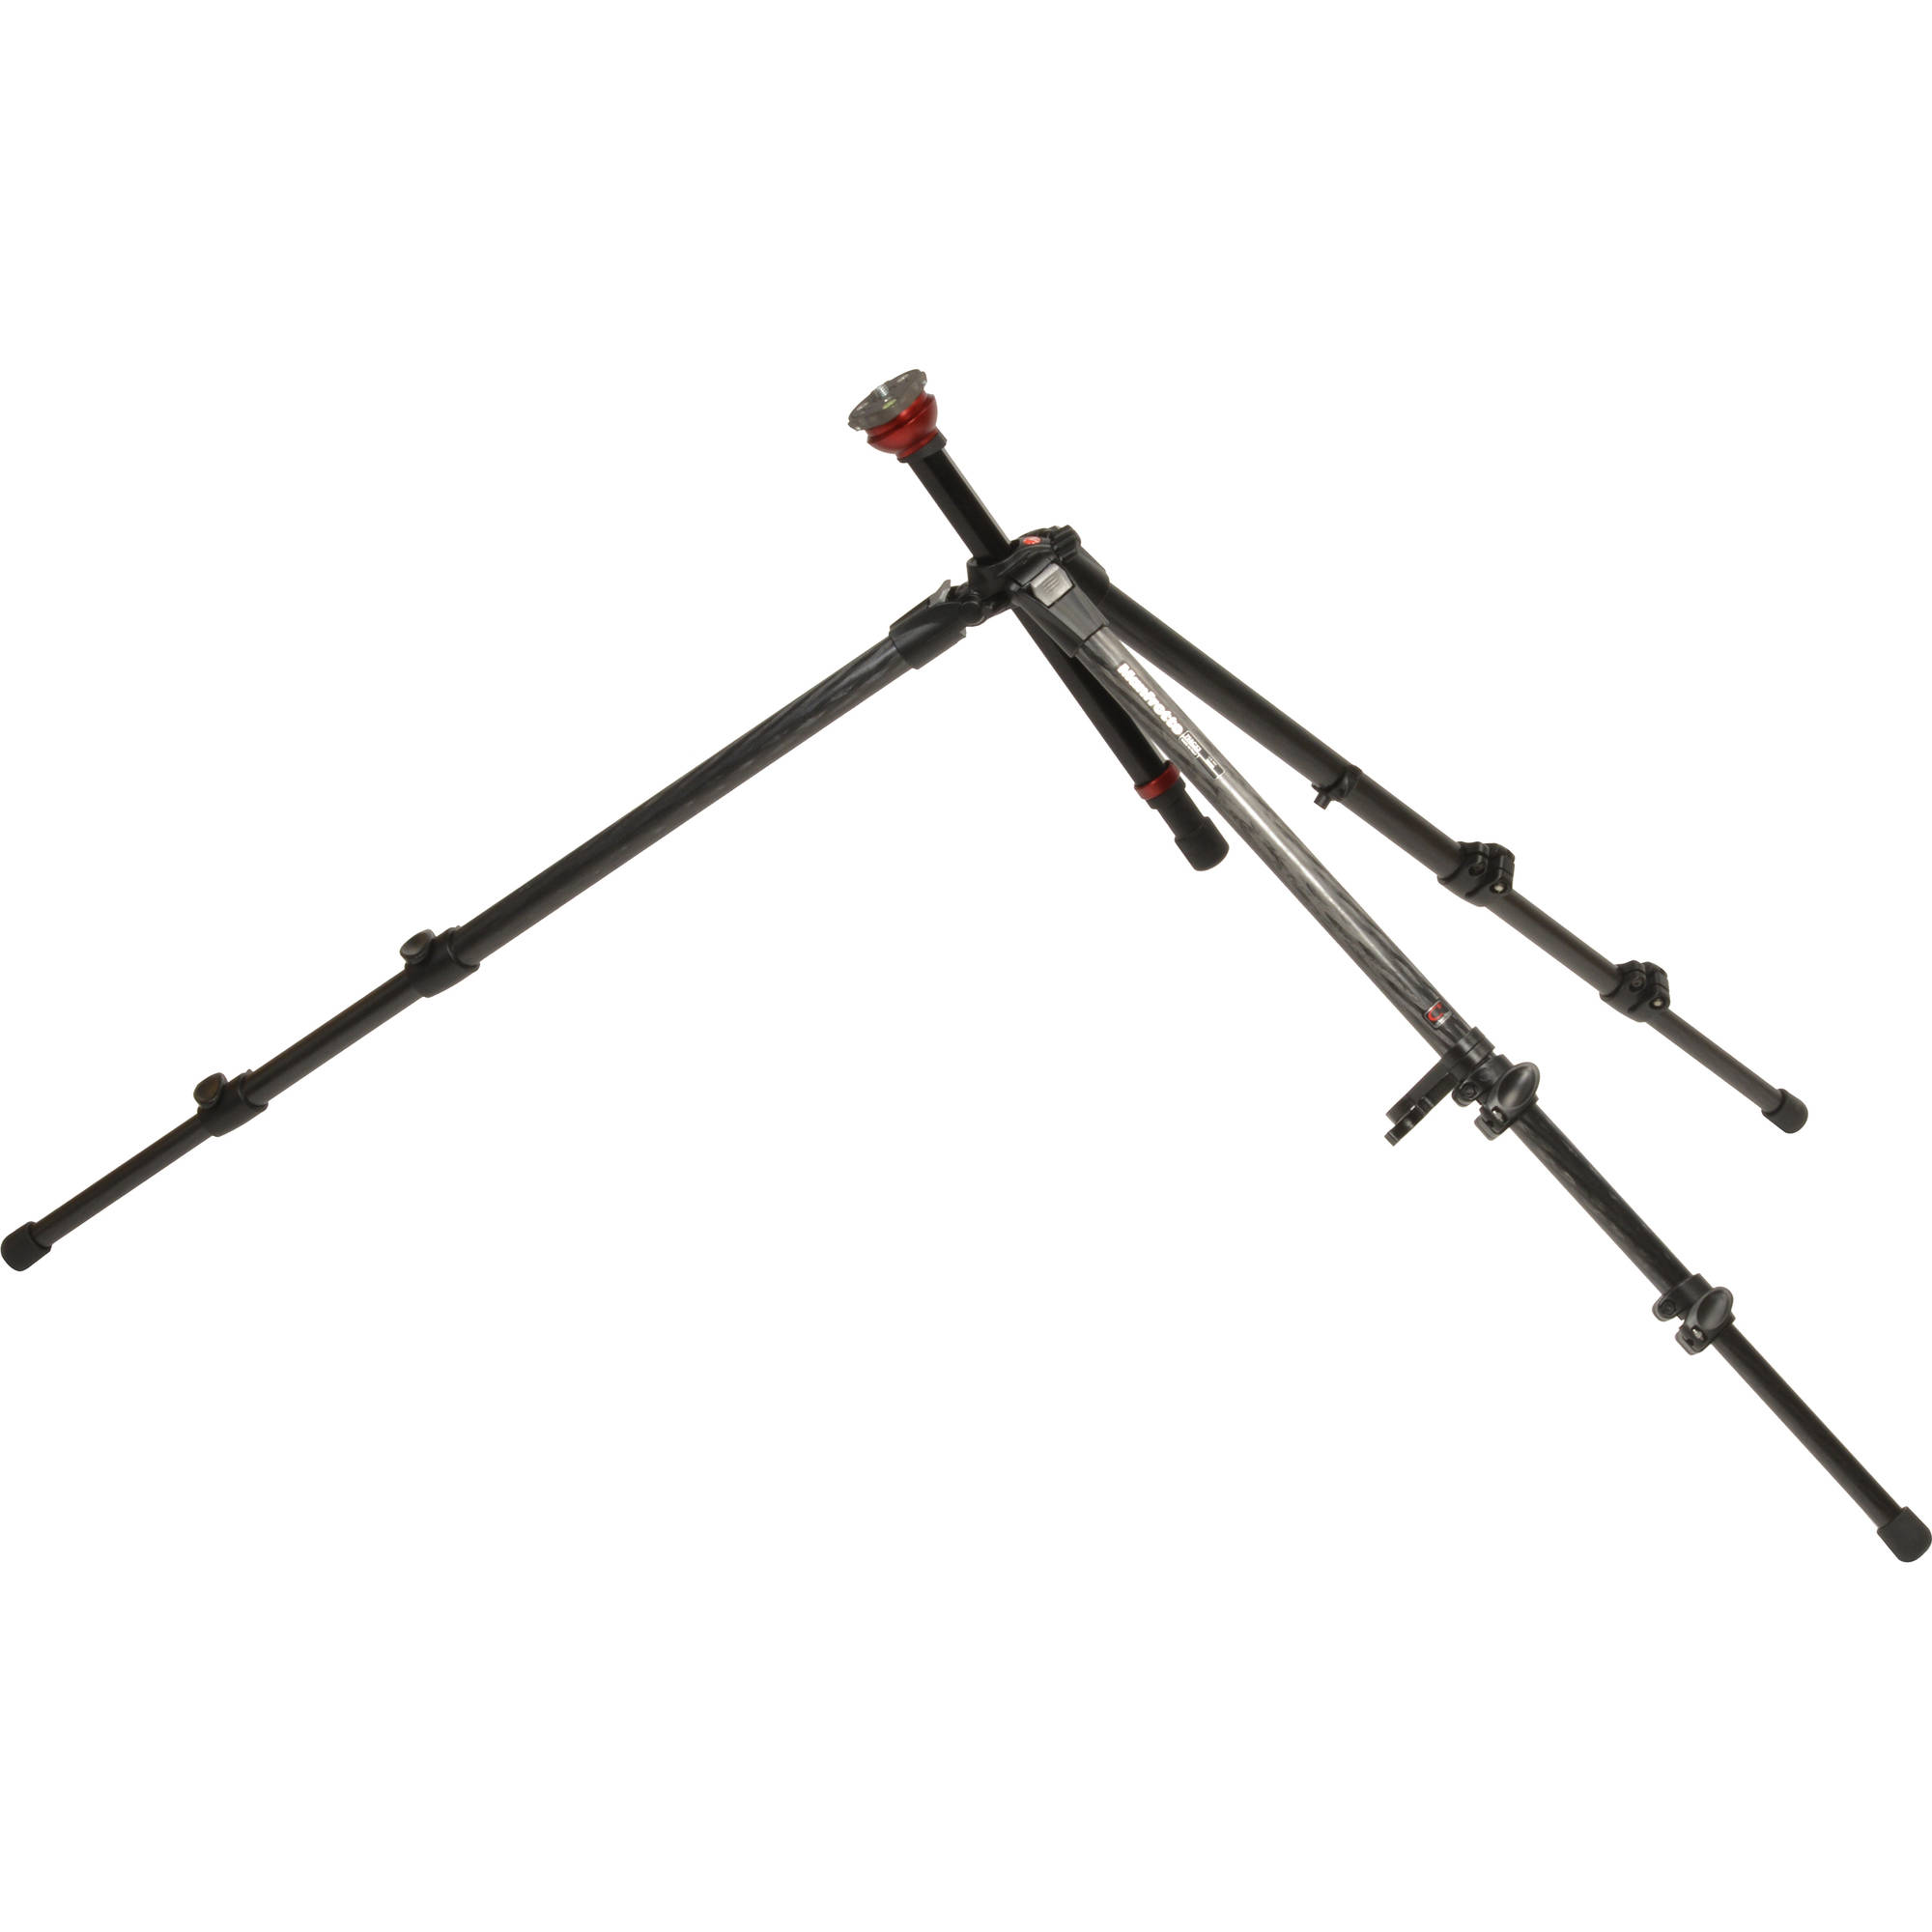 Manfrotto 500AH755CX Manfrotto 755CX3 Tripod With 500AH Head And Padded Bag Kit